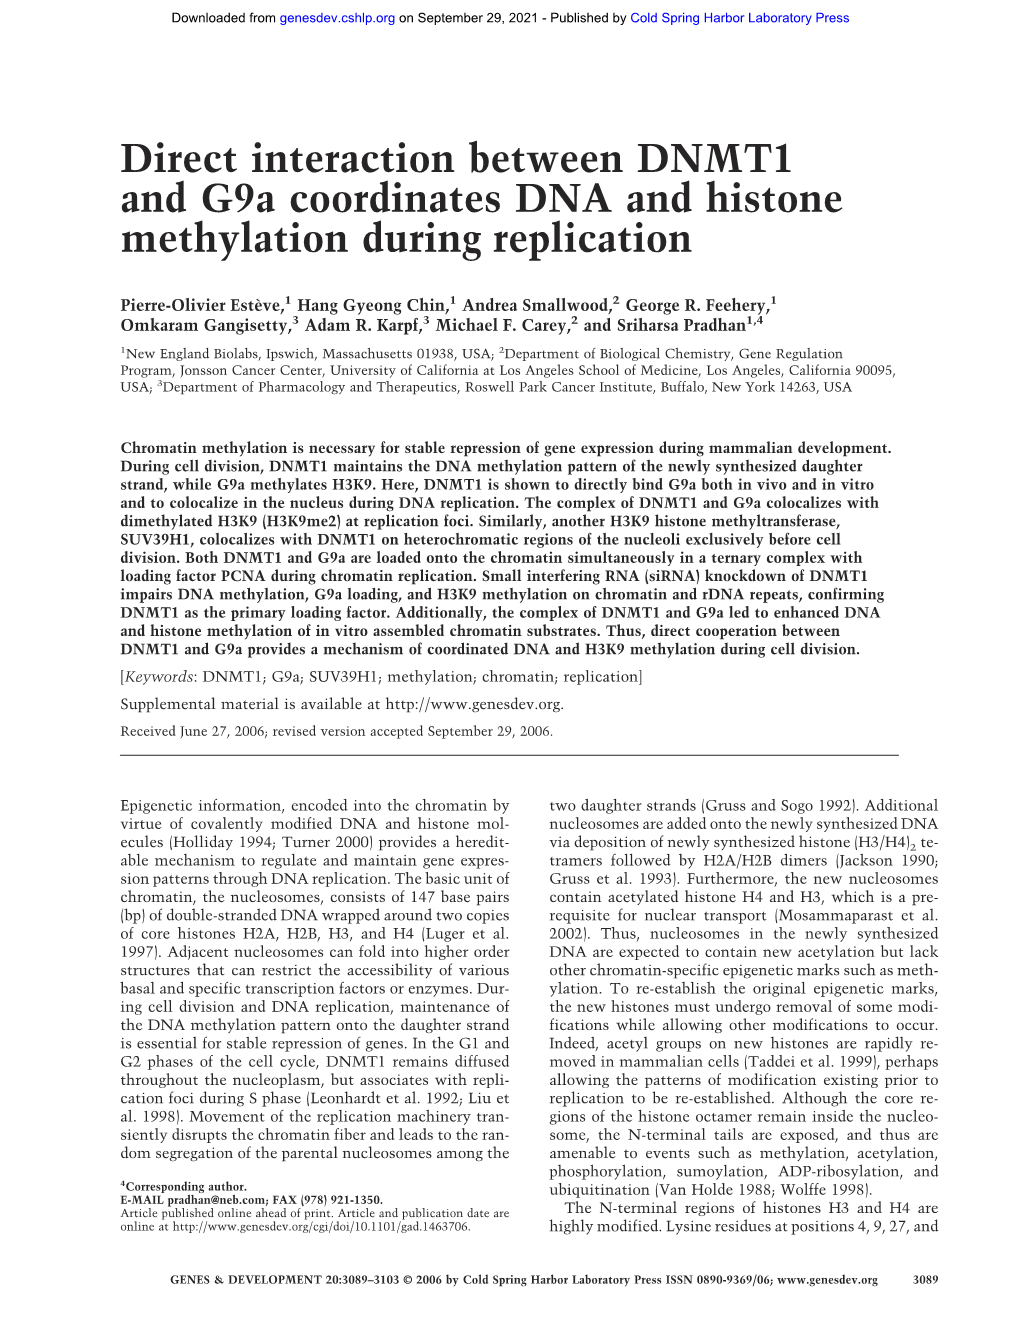 Direct Interaction Between DNMT1 and G9a Coordinates DNA and Histone Methylation During Replication